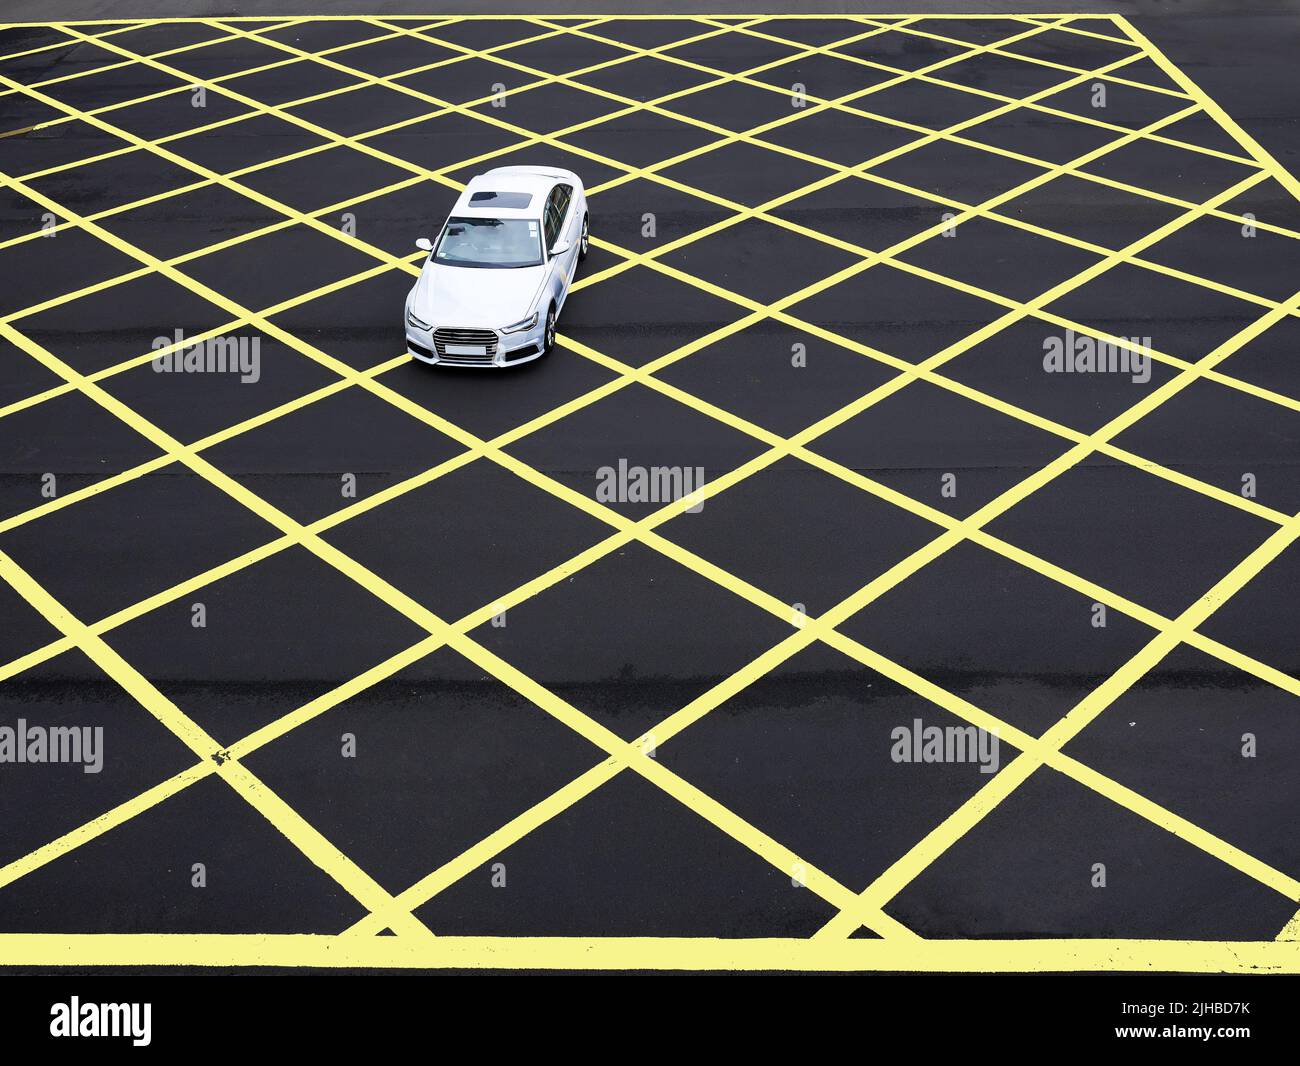 A car drive through the asphalt road which painted in Yellow line geometric shape square grid pattern of line marking Stock Photo